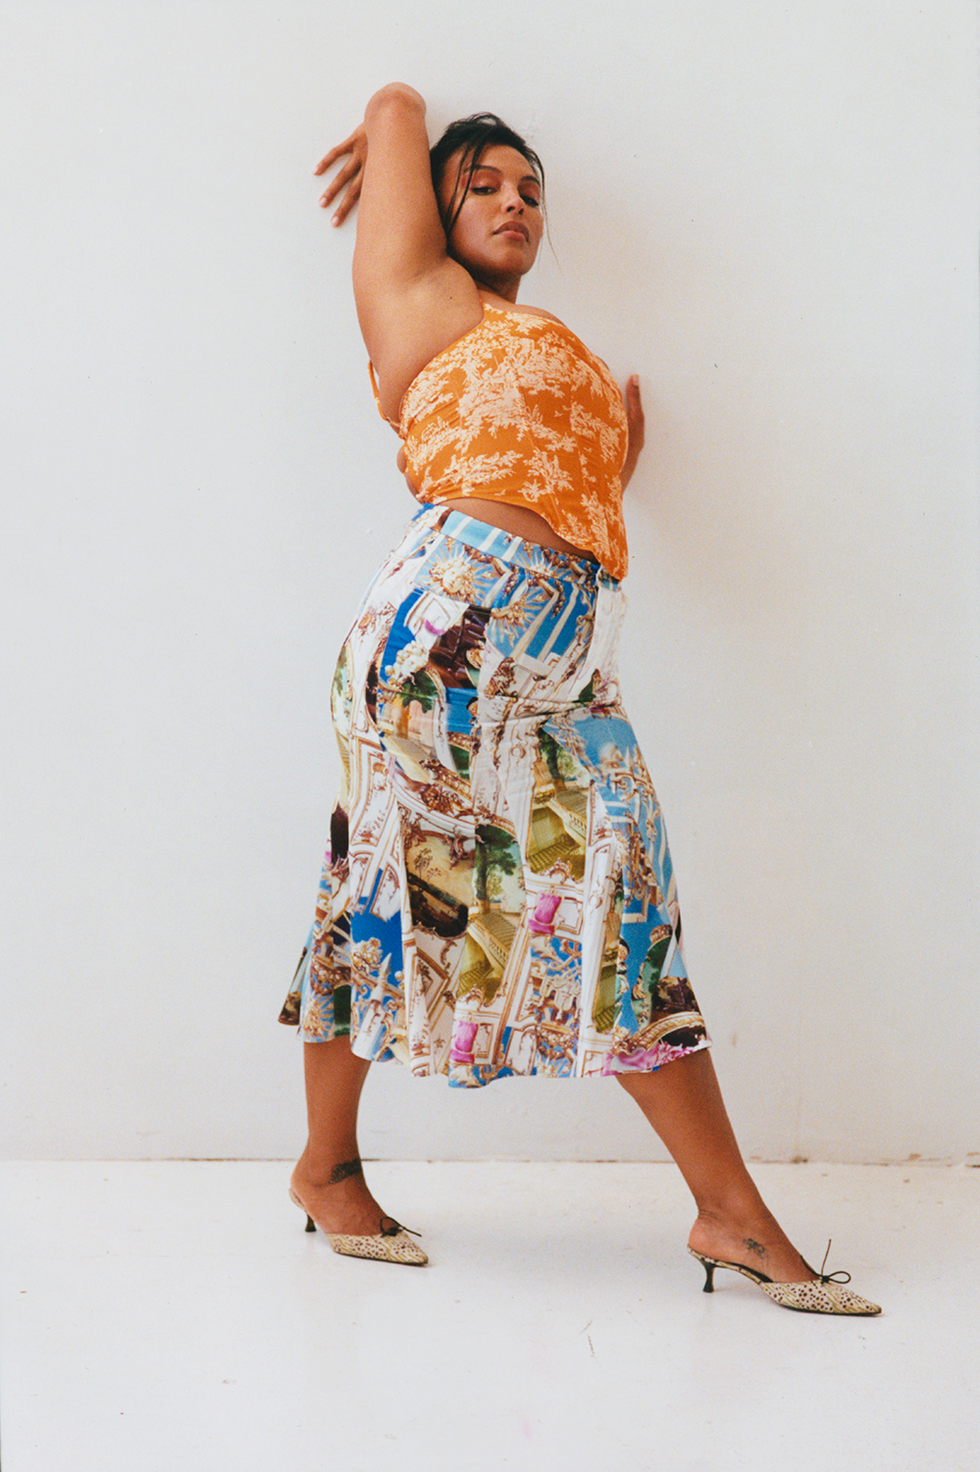 paloma elsesser wears a miaou top and skirt in front of a blank wall to illustrate the launch of miaou extended sizes